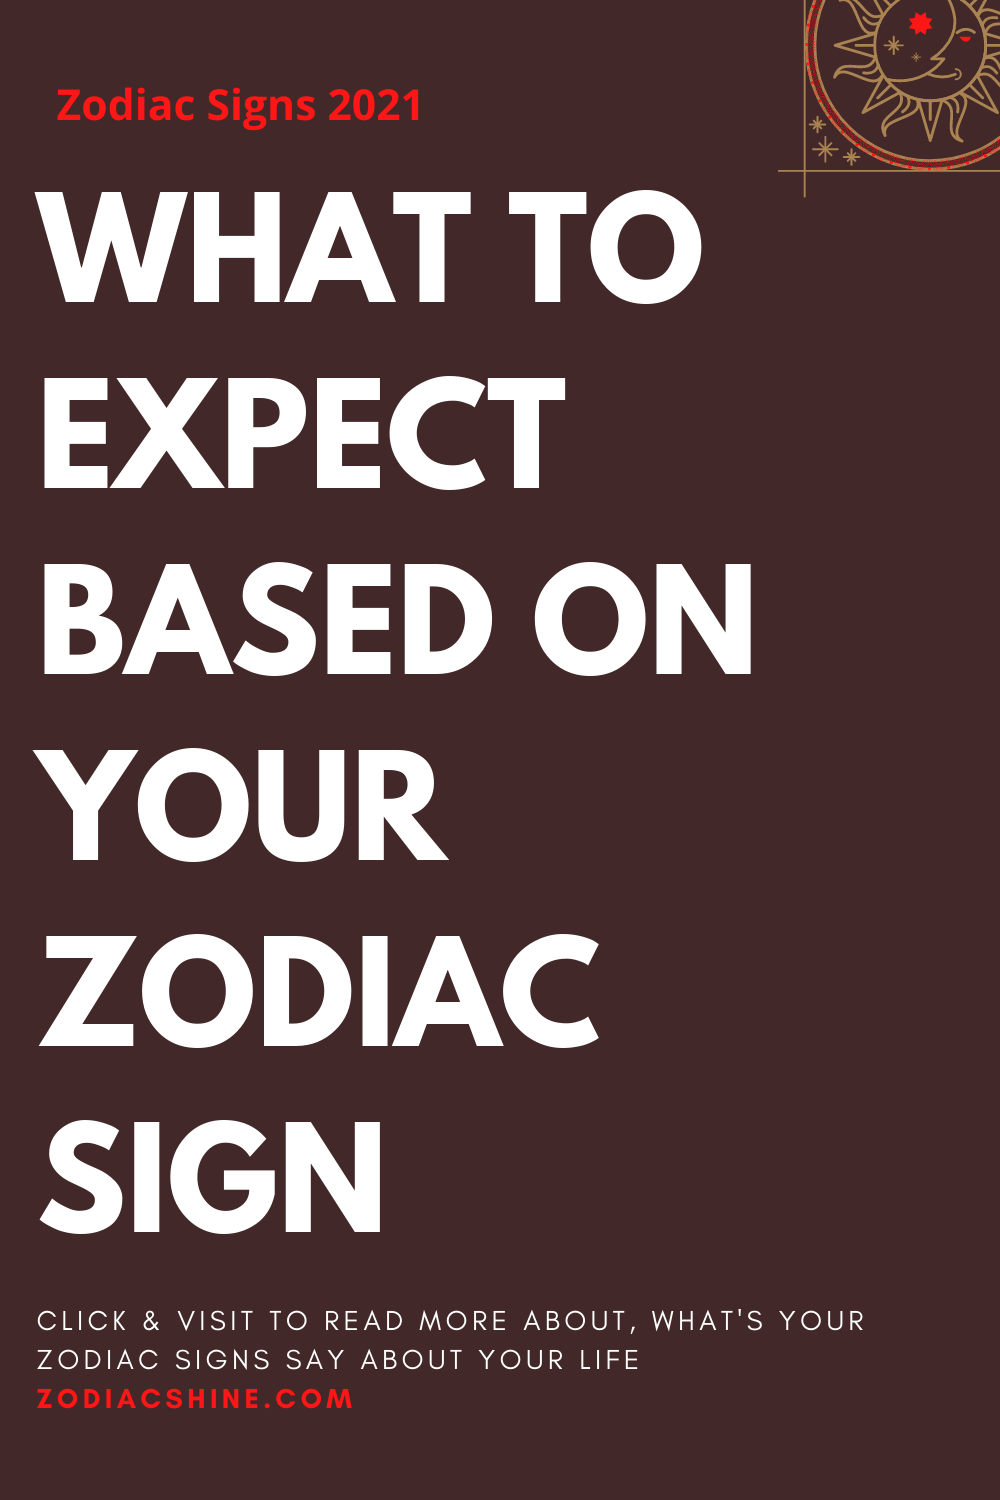 WHAT TO EXPECT BASED ON YOUR ZODIAC SIGN